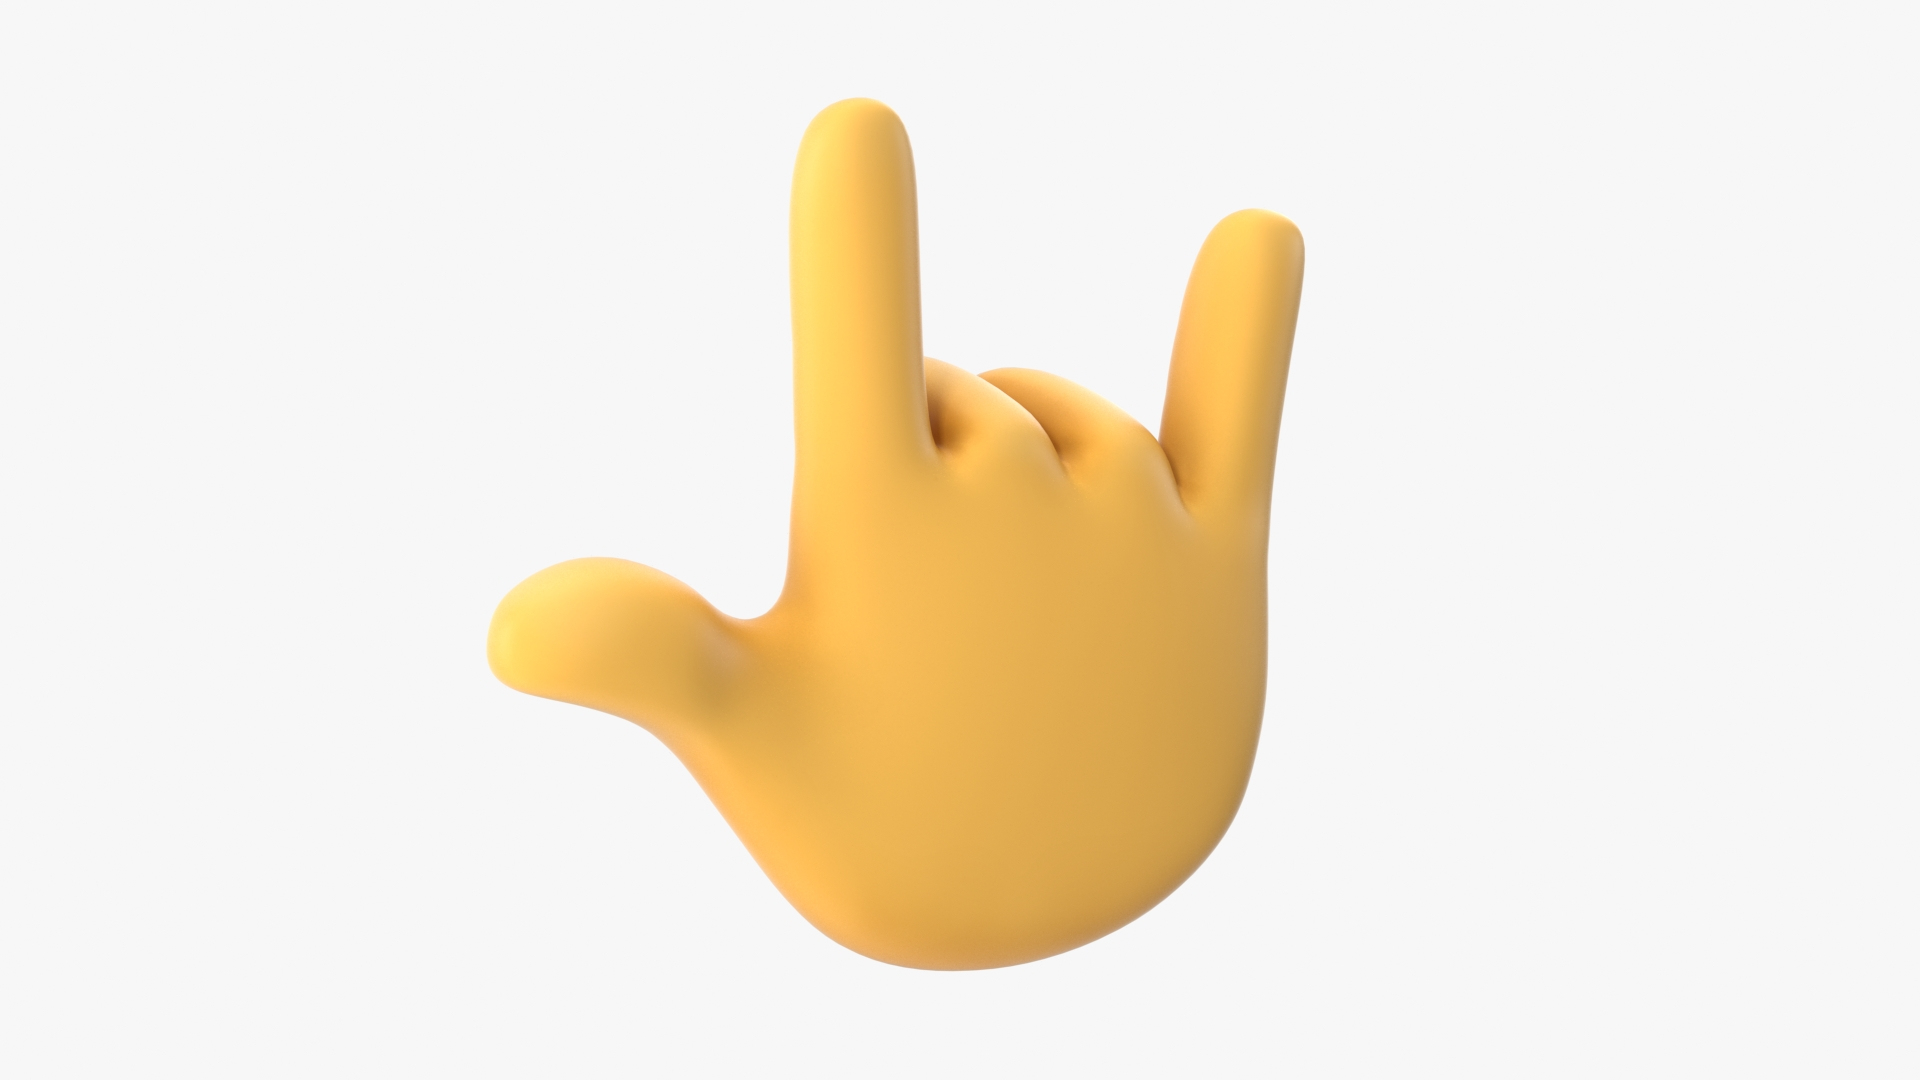 I Love You Hand Gesture Stock Photo | Royalty-Free | FreeImages